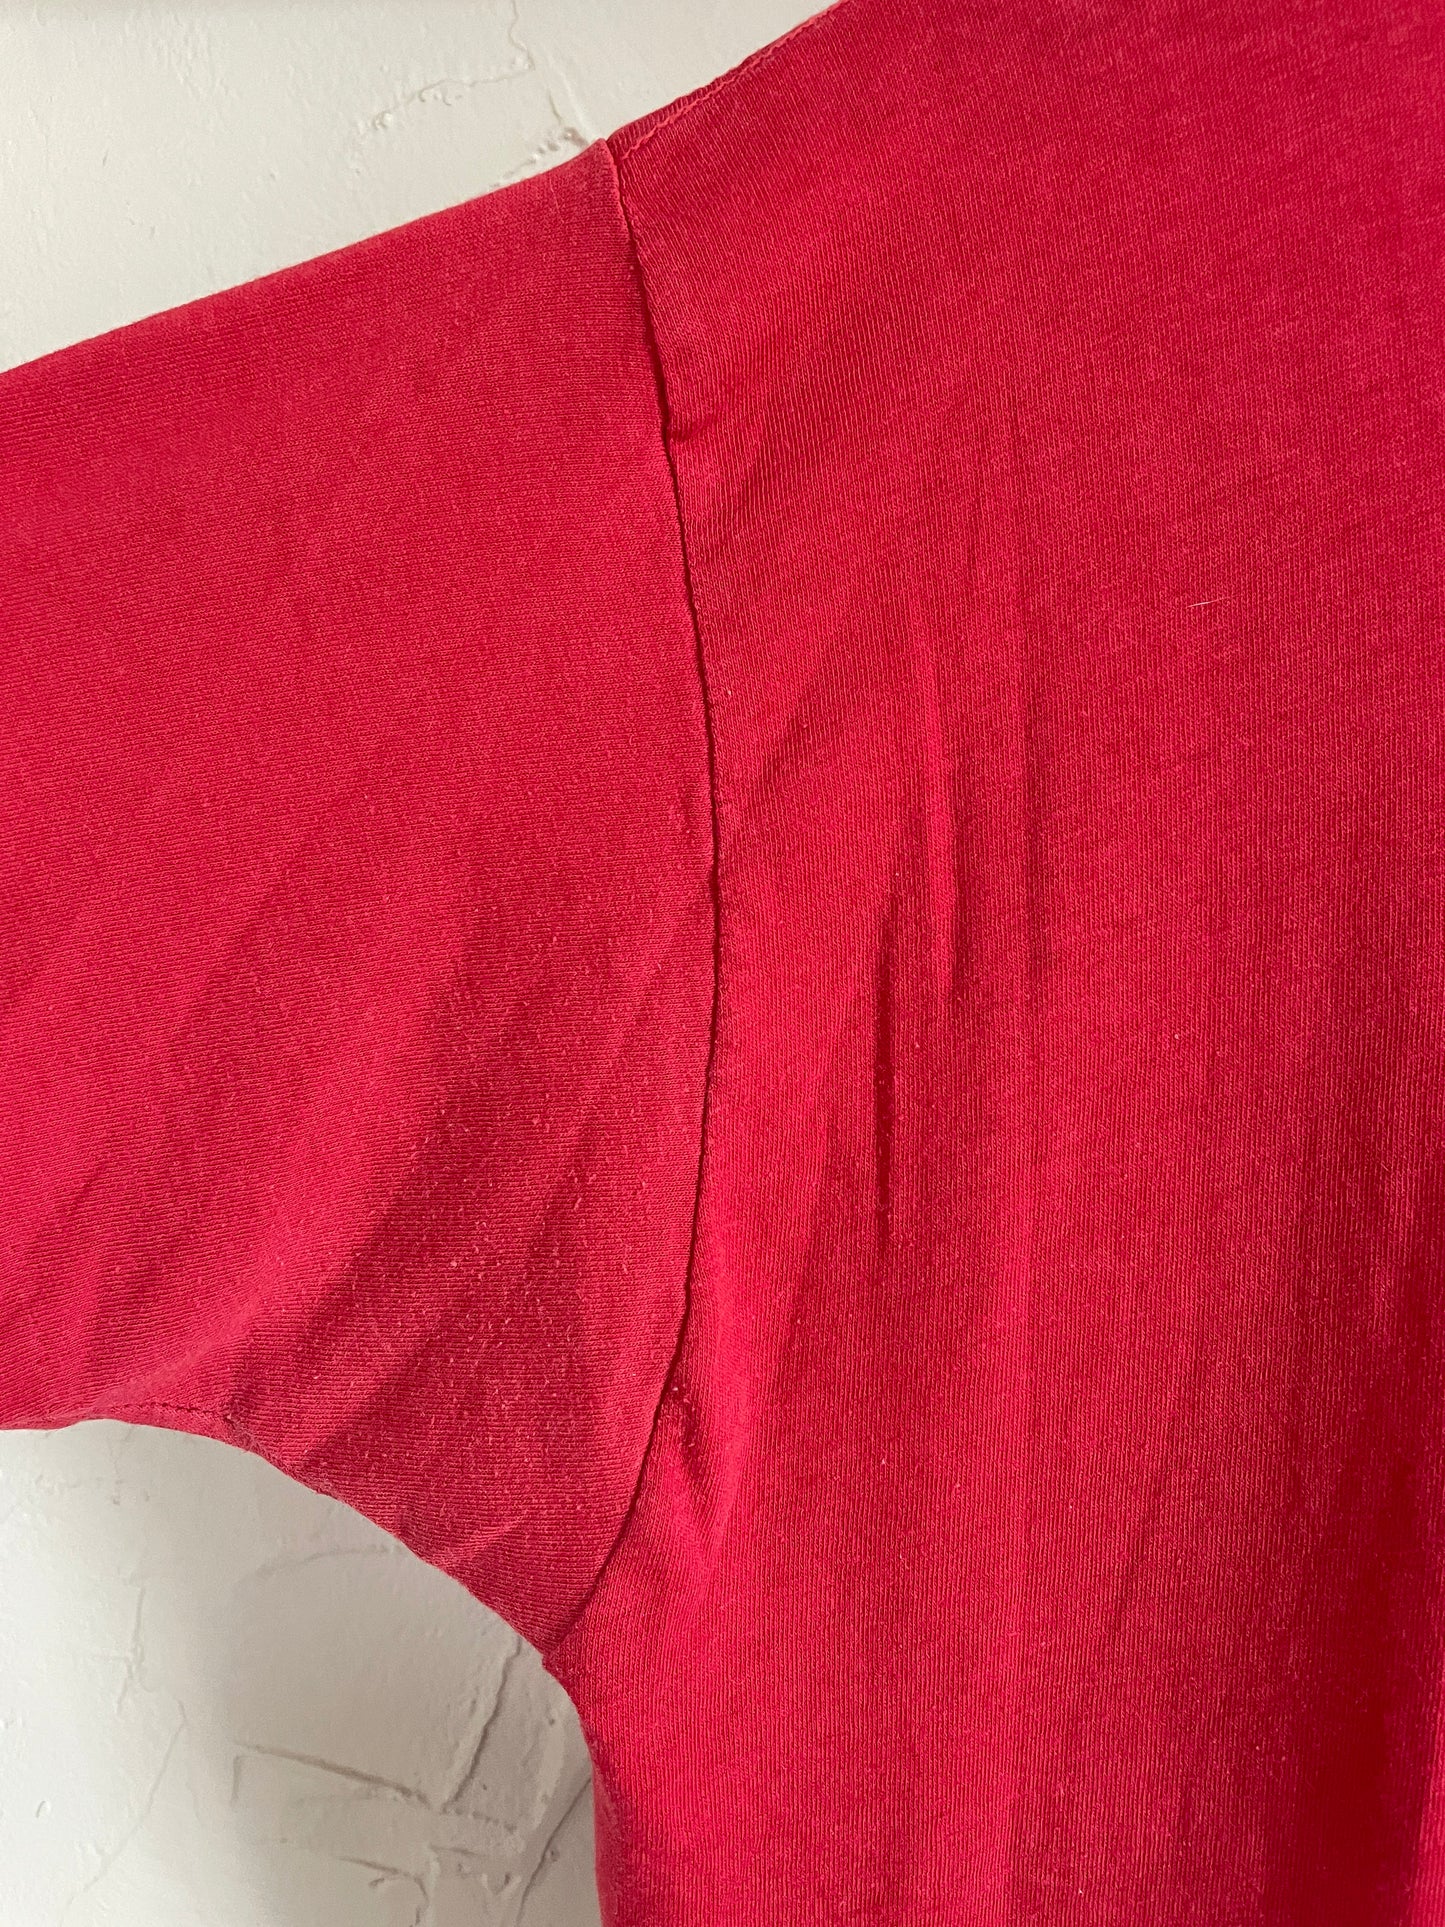 80s Blank Red Pocket Tee